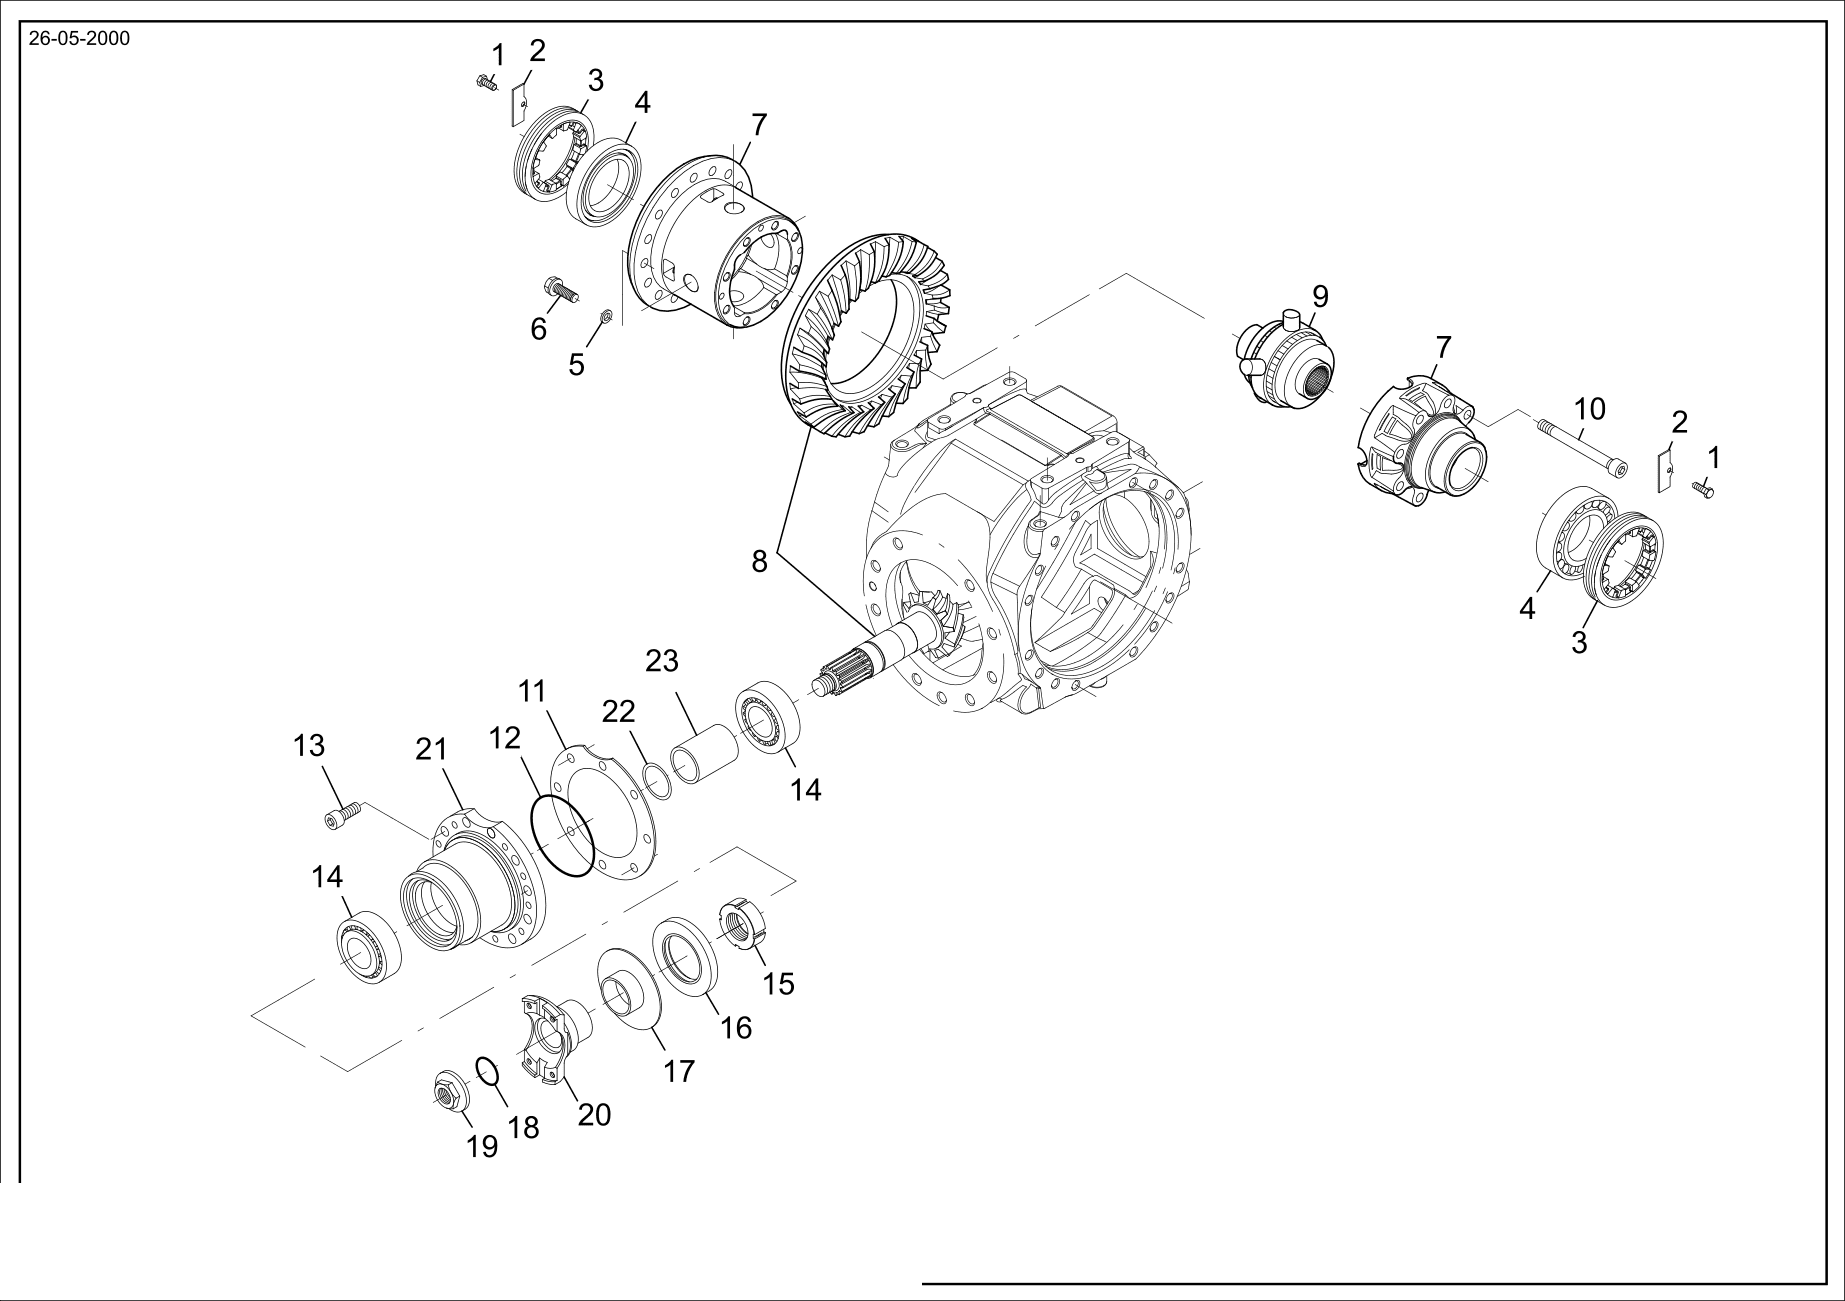 drawing for CATERPILLAR 015424-2-21 - COVER (figure 3)